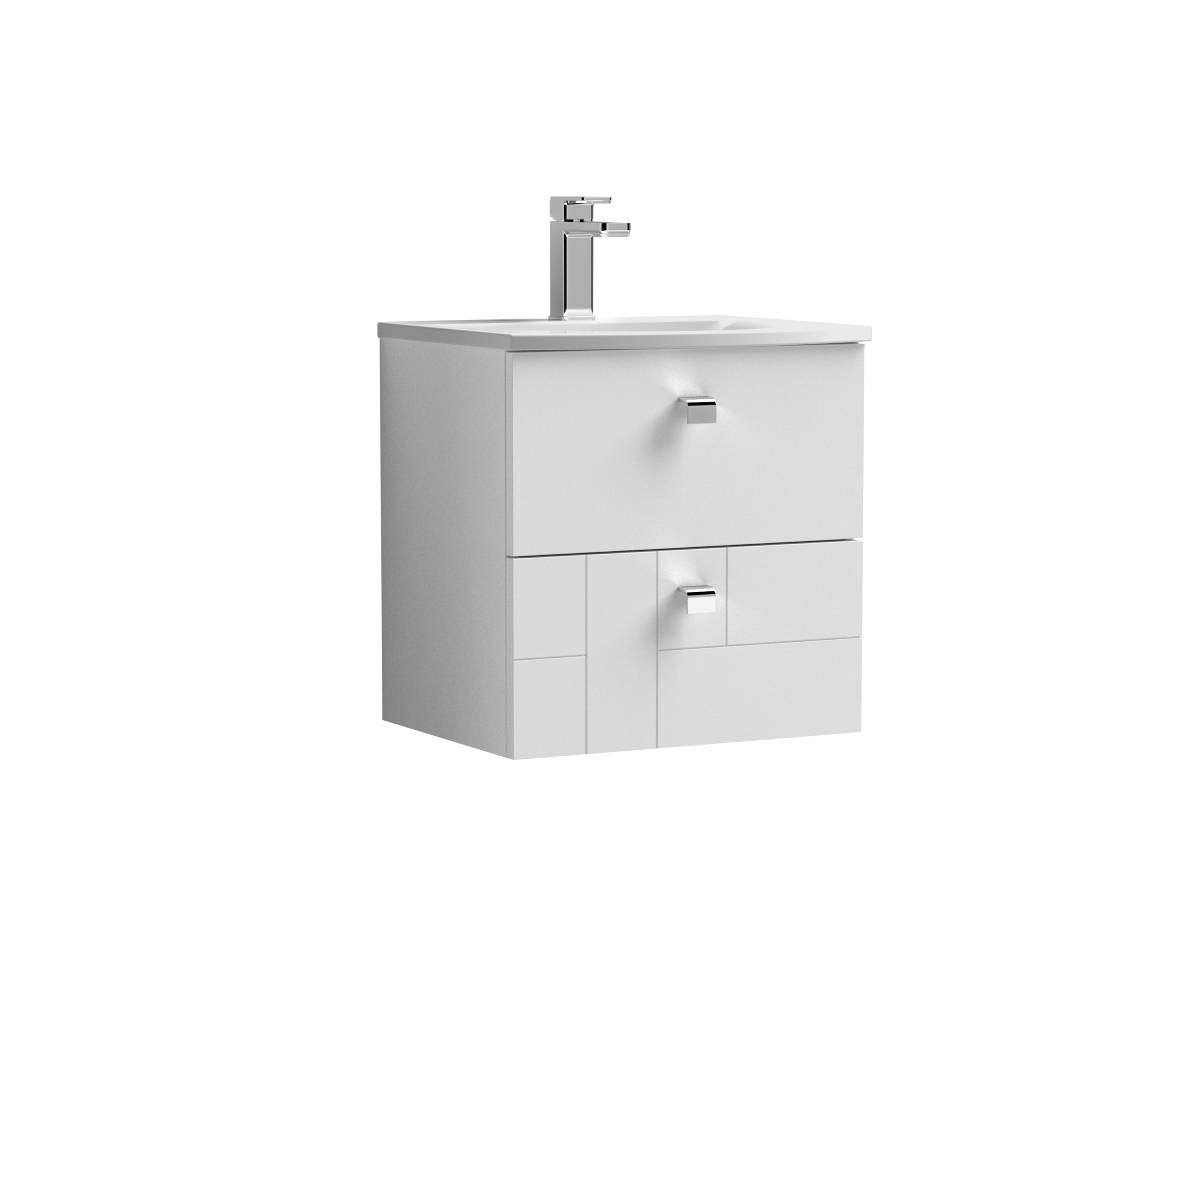 Nuie Blocks 500mm Wall Mounted Vanity Unit & Curved Basin - Satin White (13216)